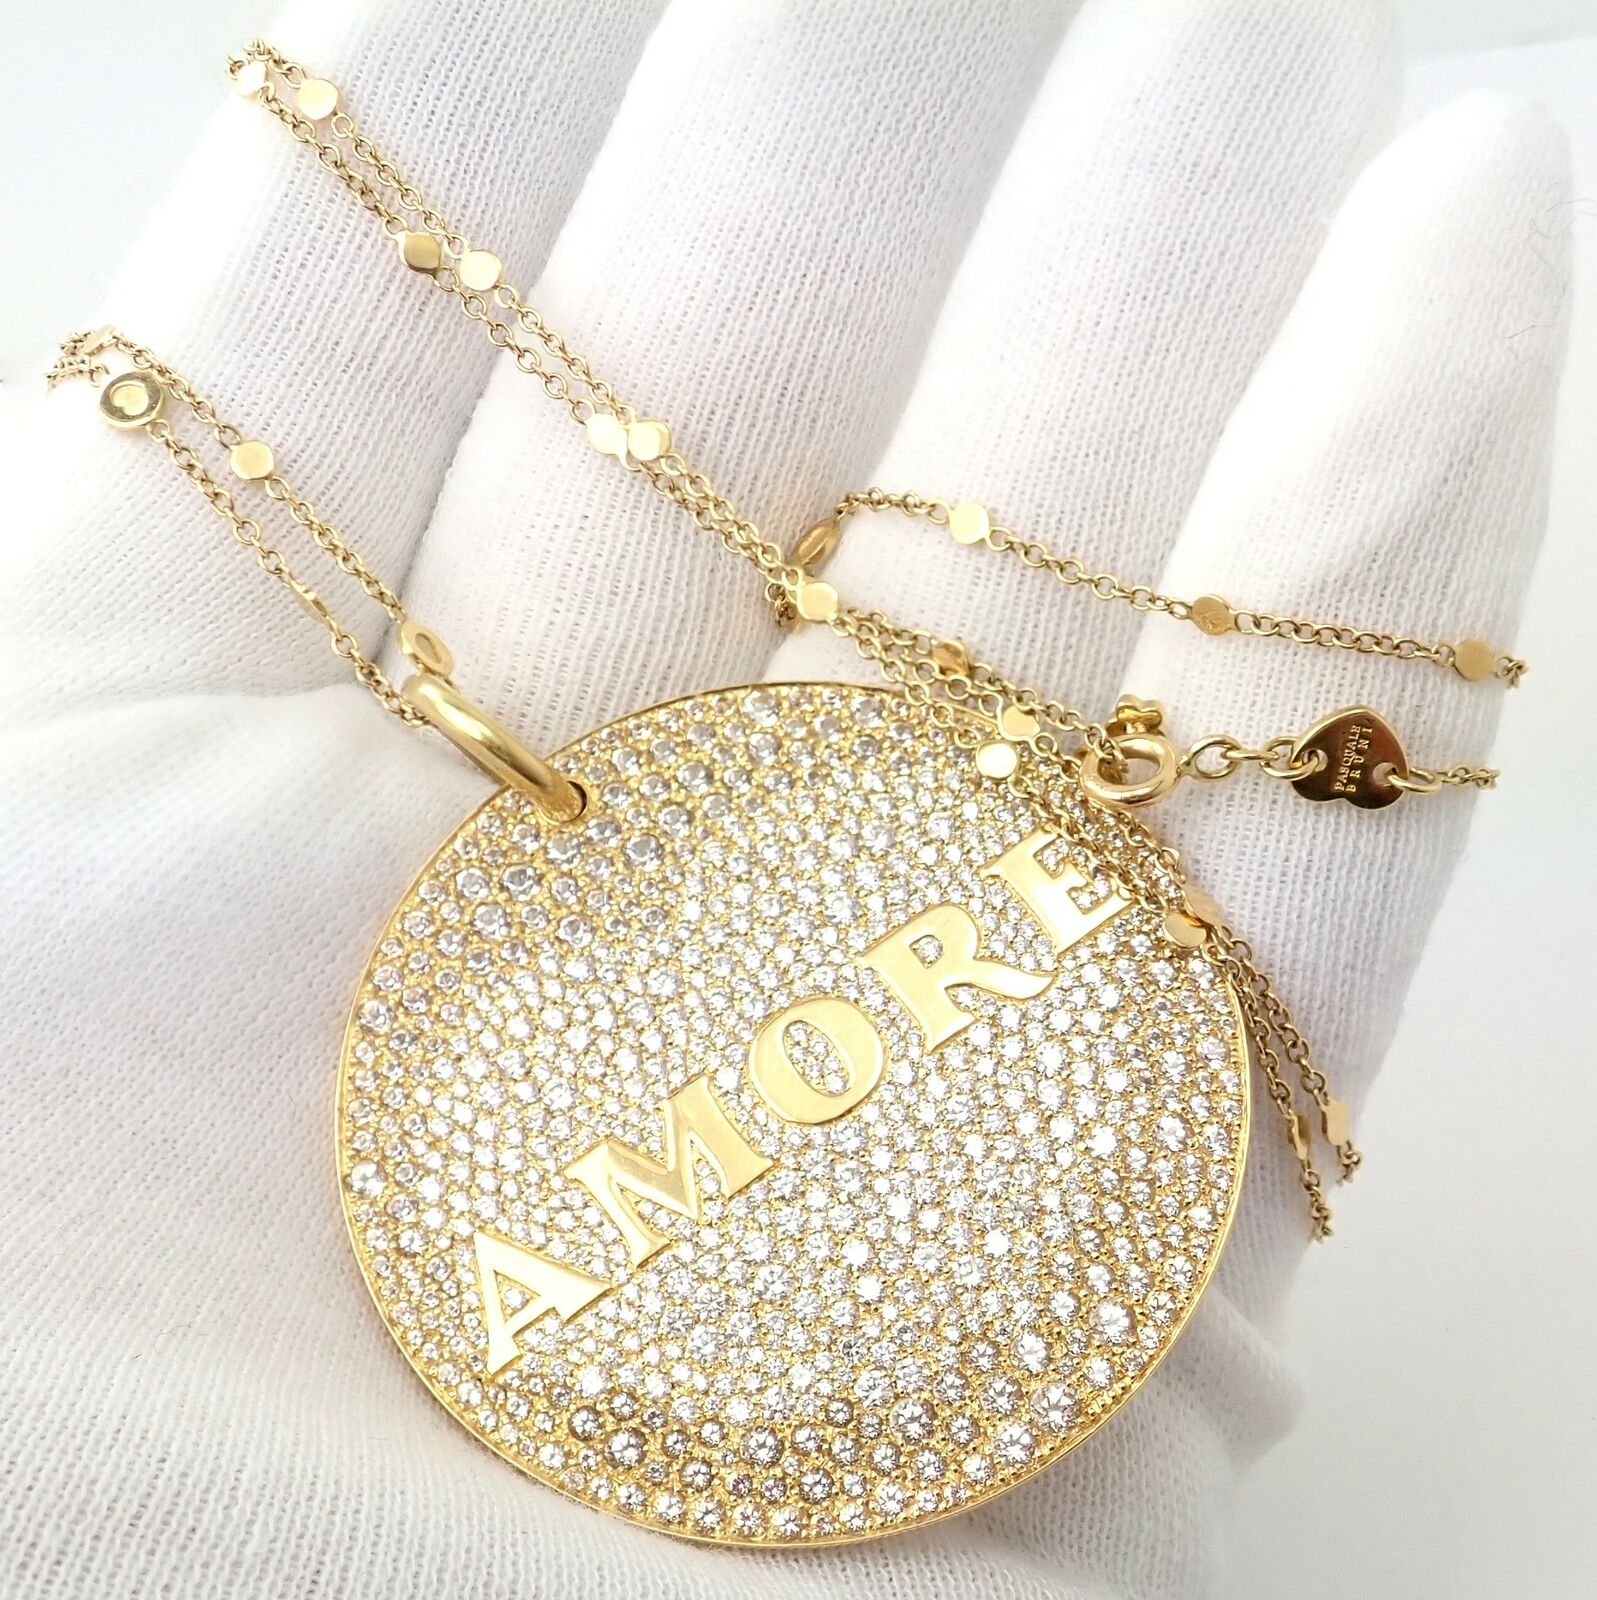 Pasquale Bruni Jewelry & Watches:Fine Jewelry:Necklaces & Pendants Pasquale Bruni 18k Yellow Gold Extra Large Diamond + Sapp Amore Pendant Necklace